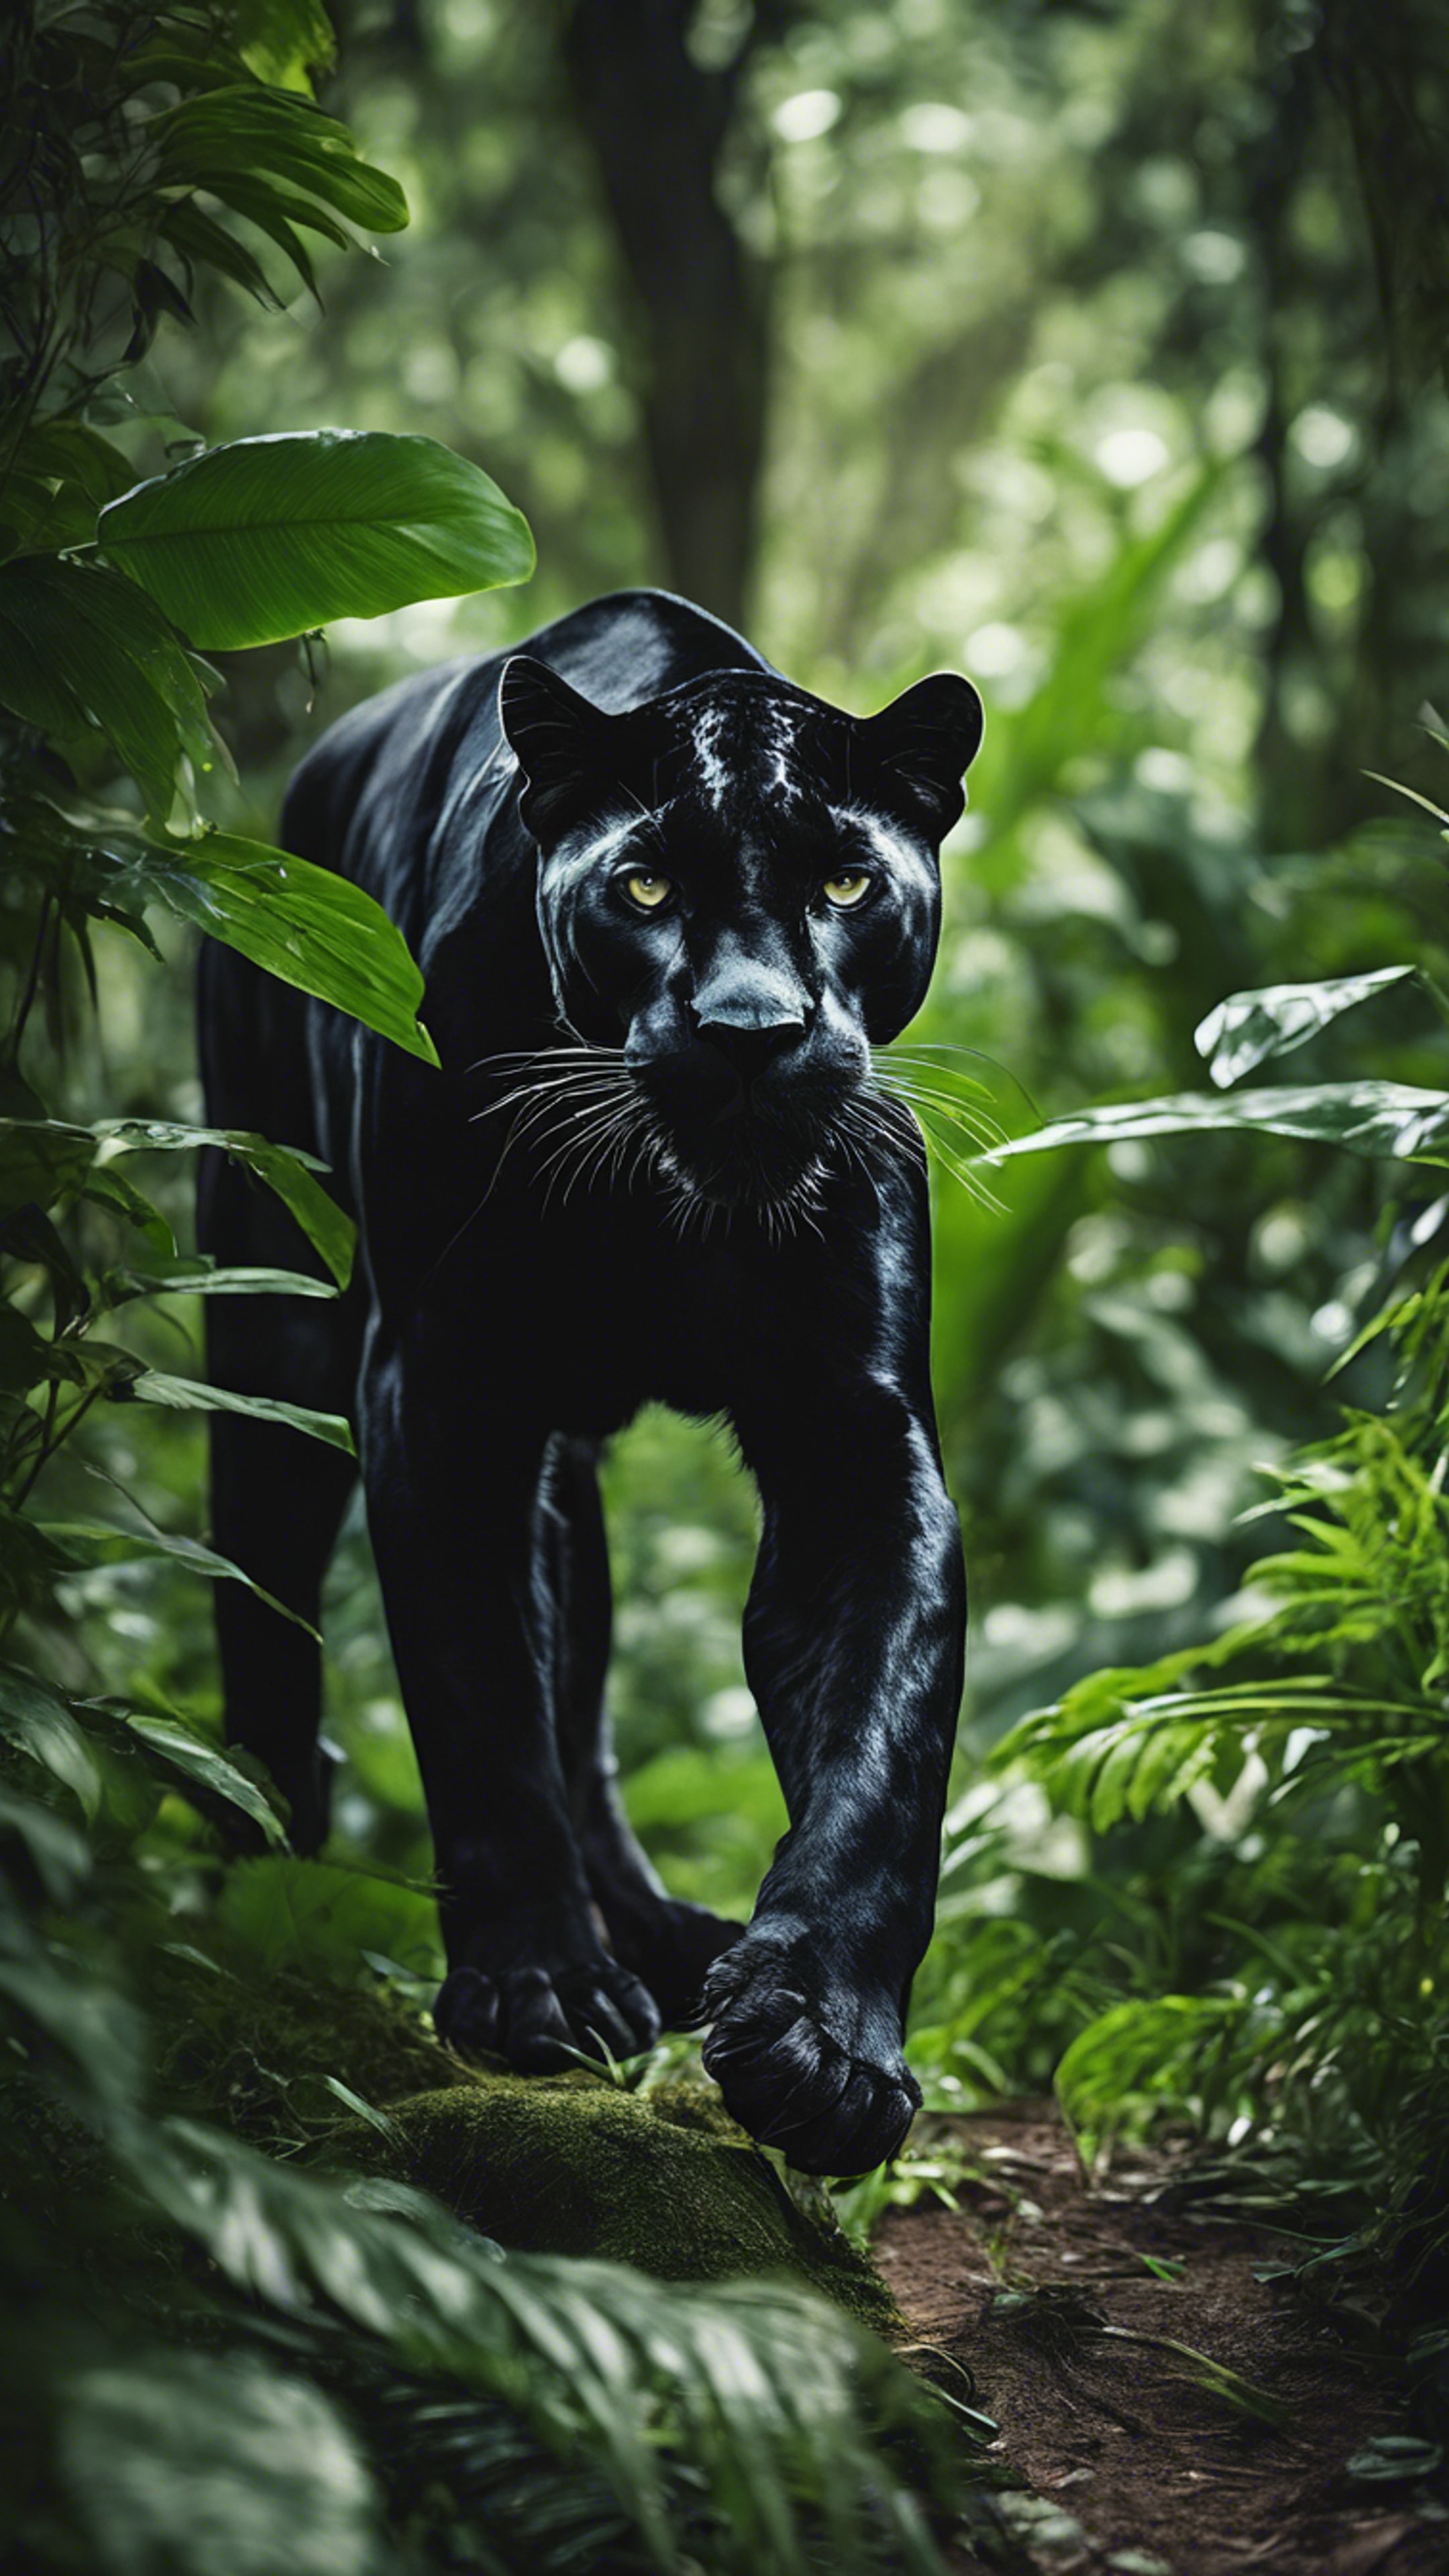 A stealthy black panther prowling in a lush green jungle. Wallpaper[c401b2fecbe84dd7be71]